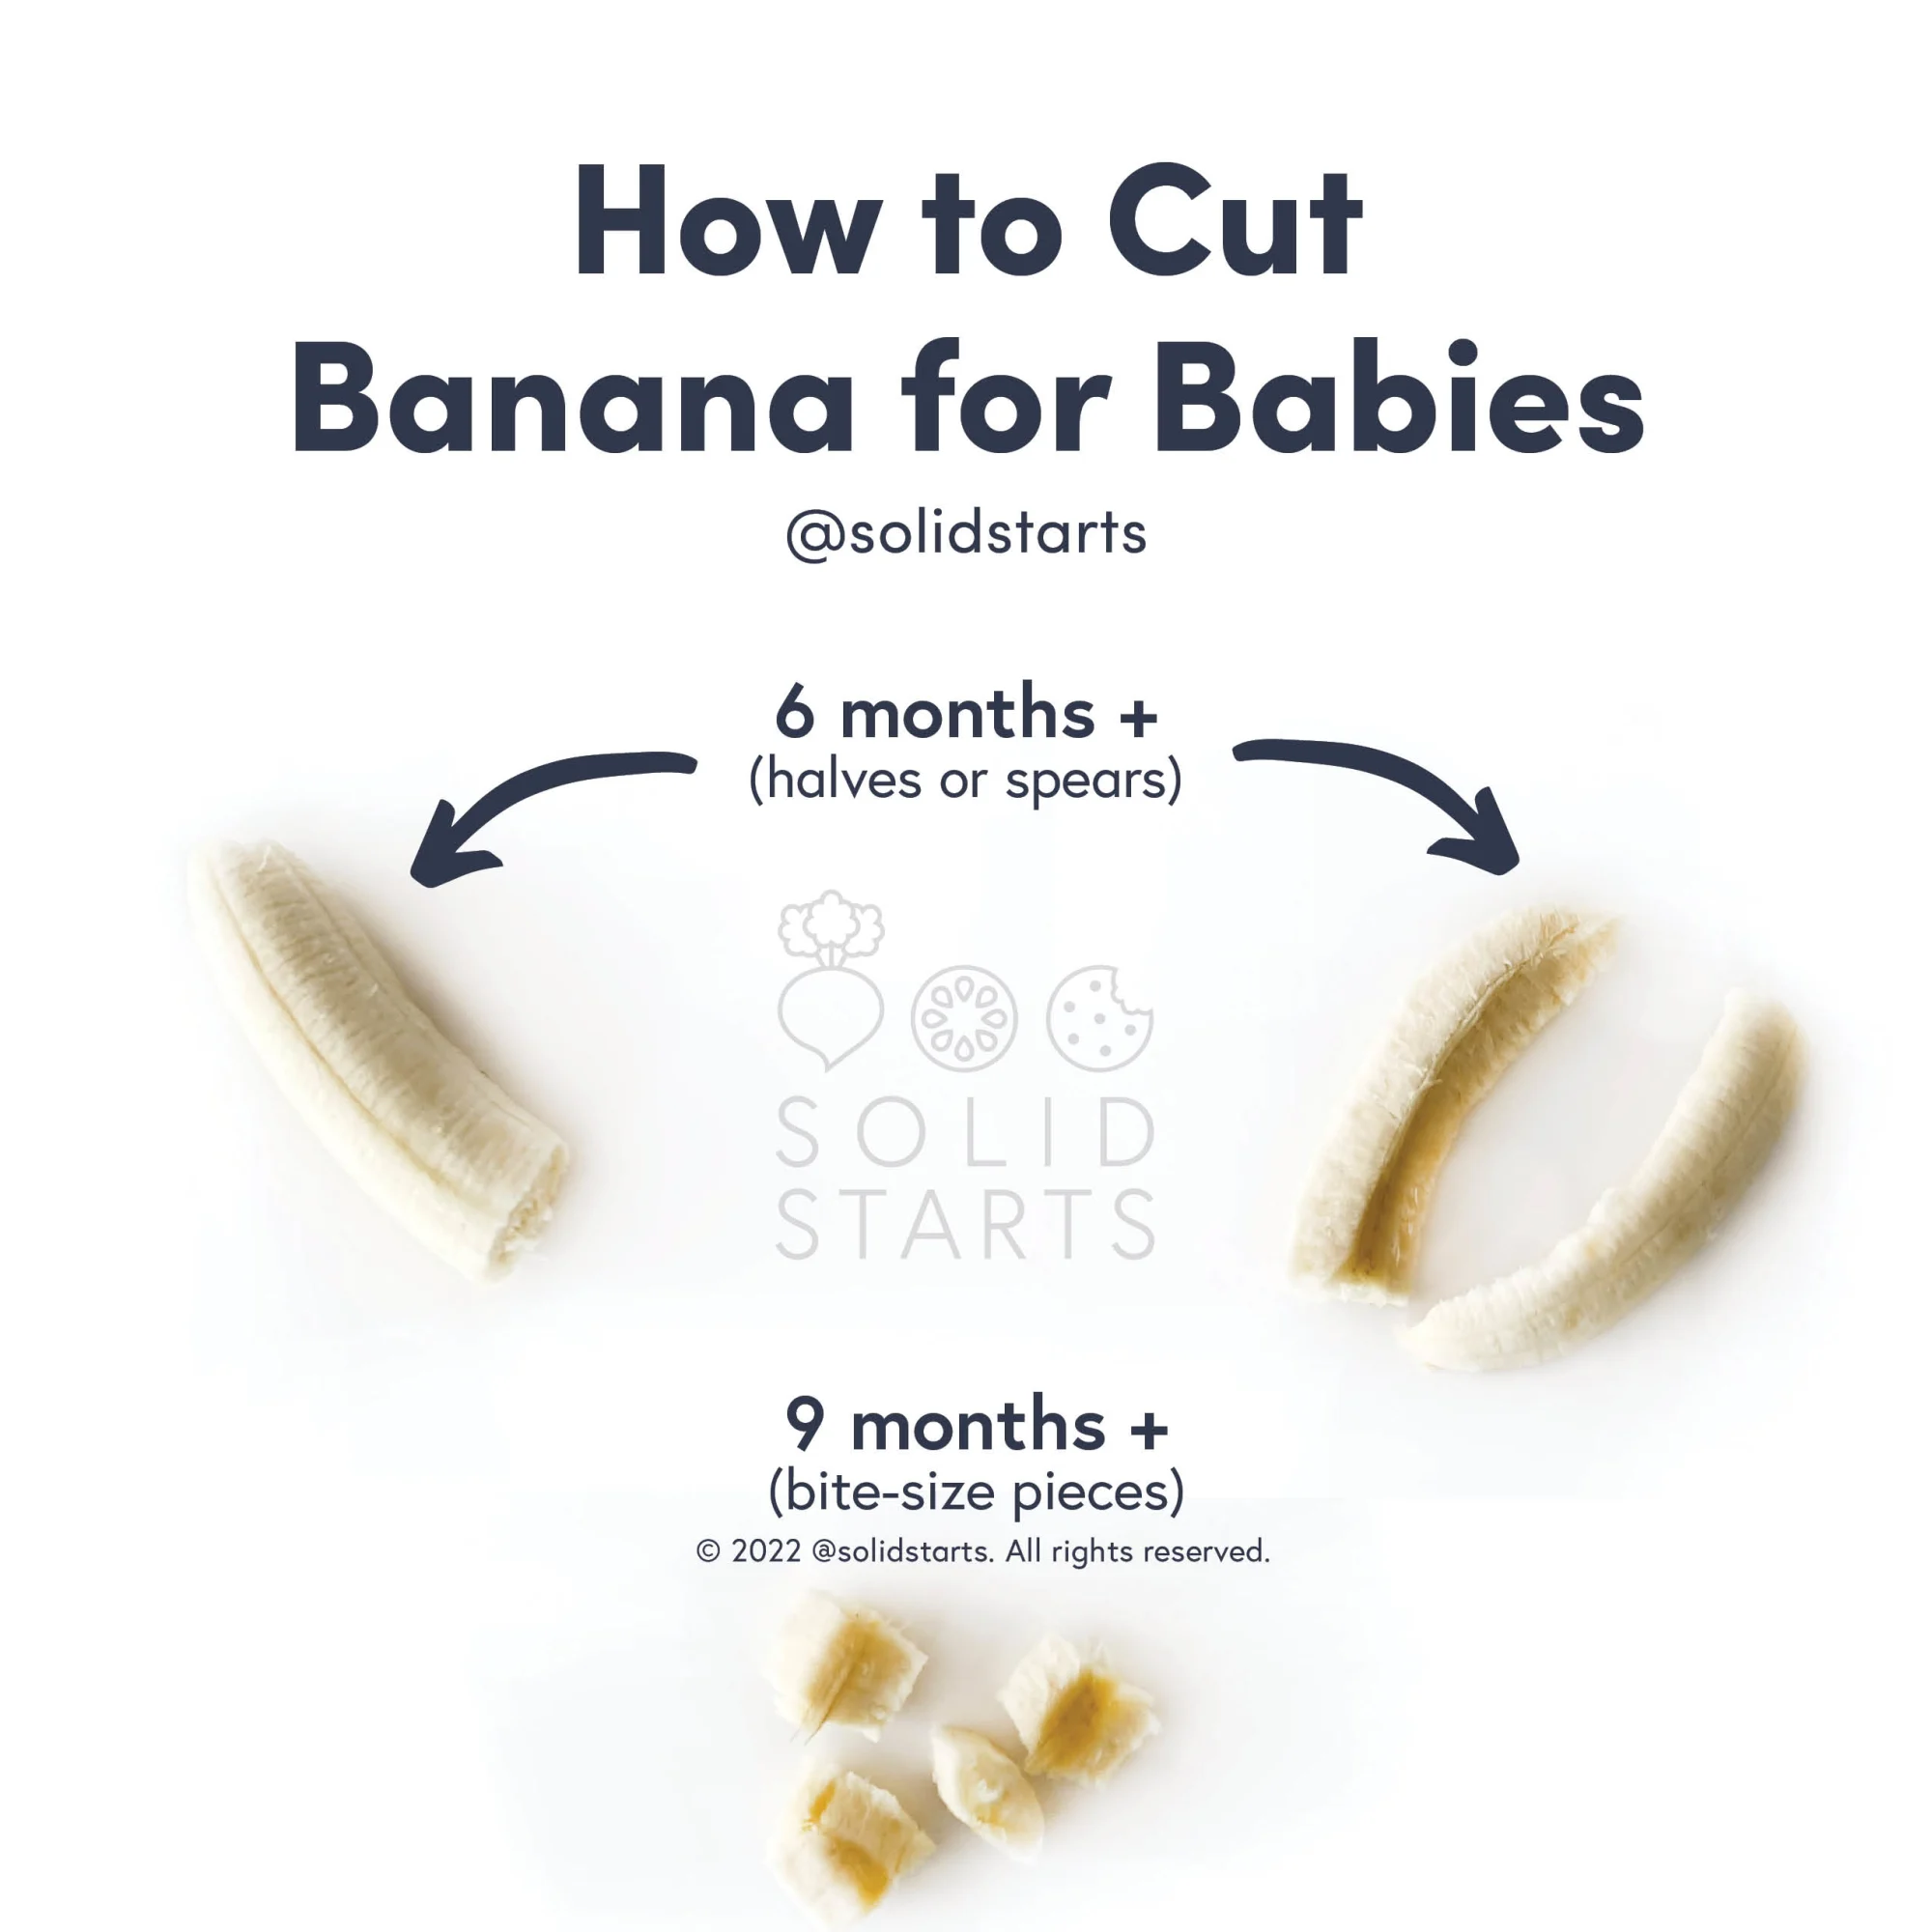 a Solid Starts infographic with the header "How to Cut Banana for Babies": a whole half or spears for 6 months, bite-sized pieces for 9 months